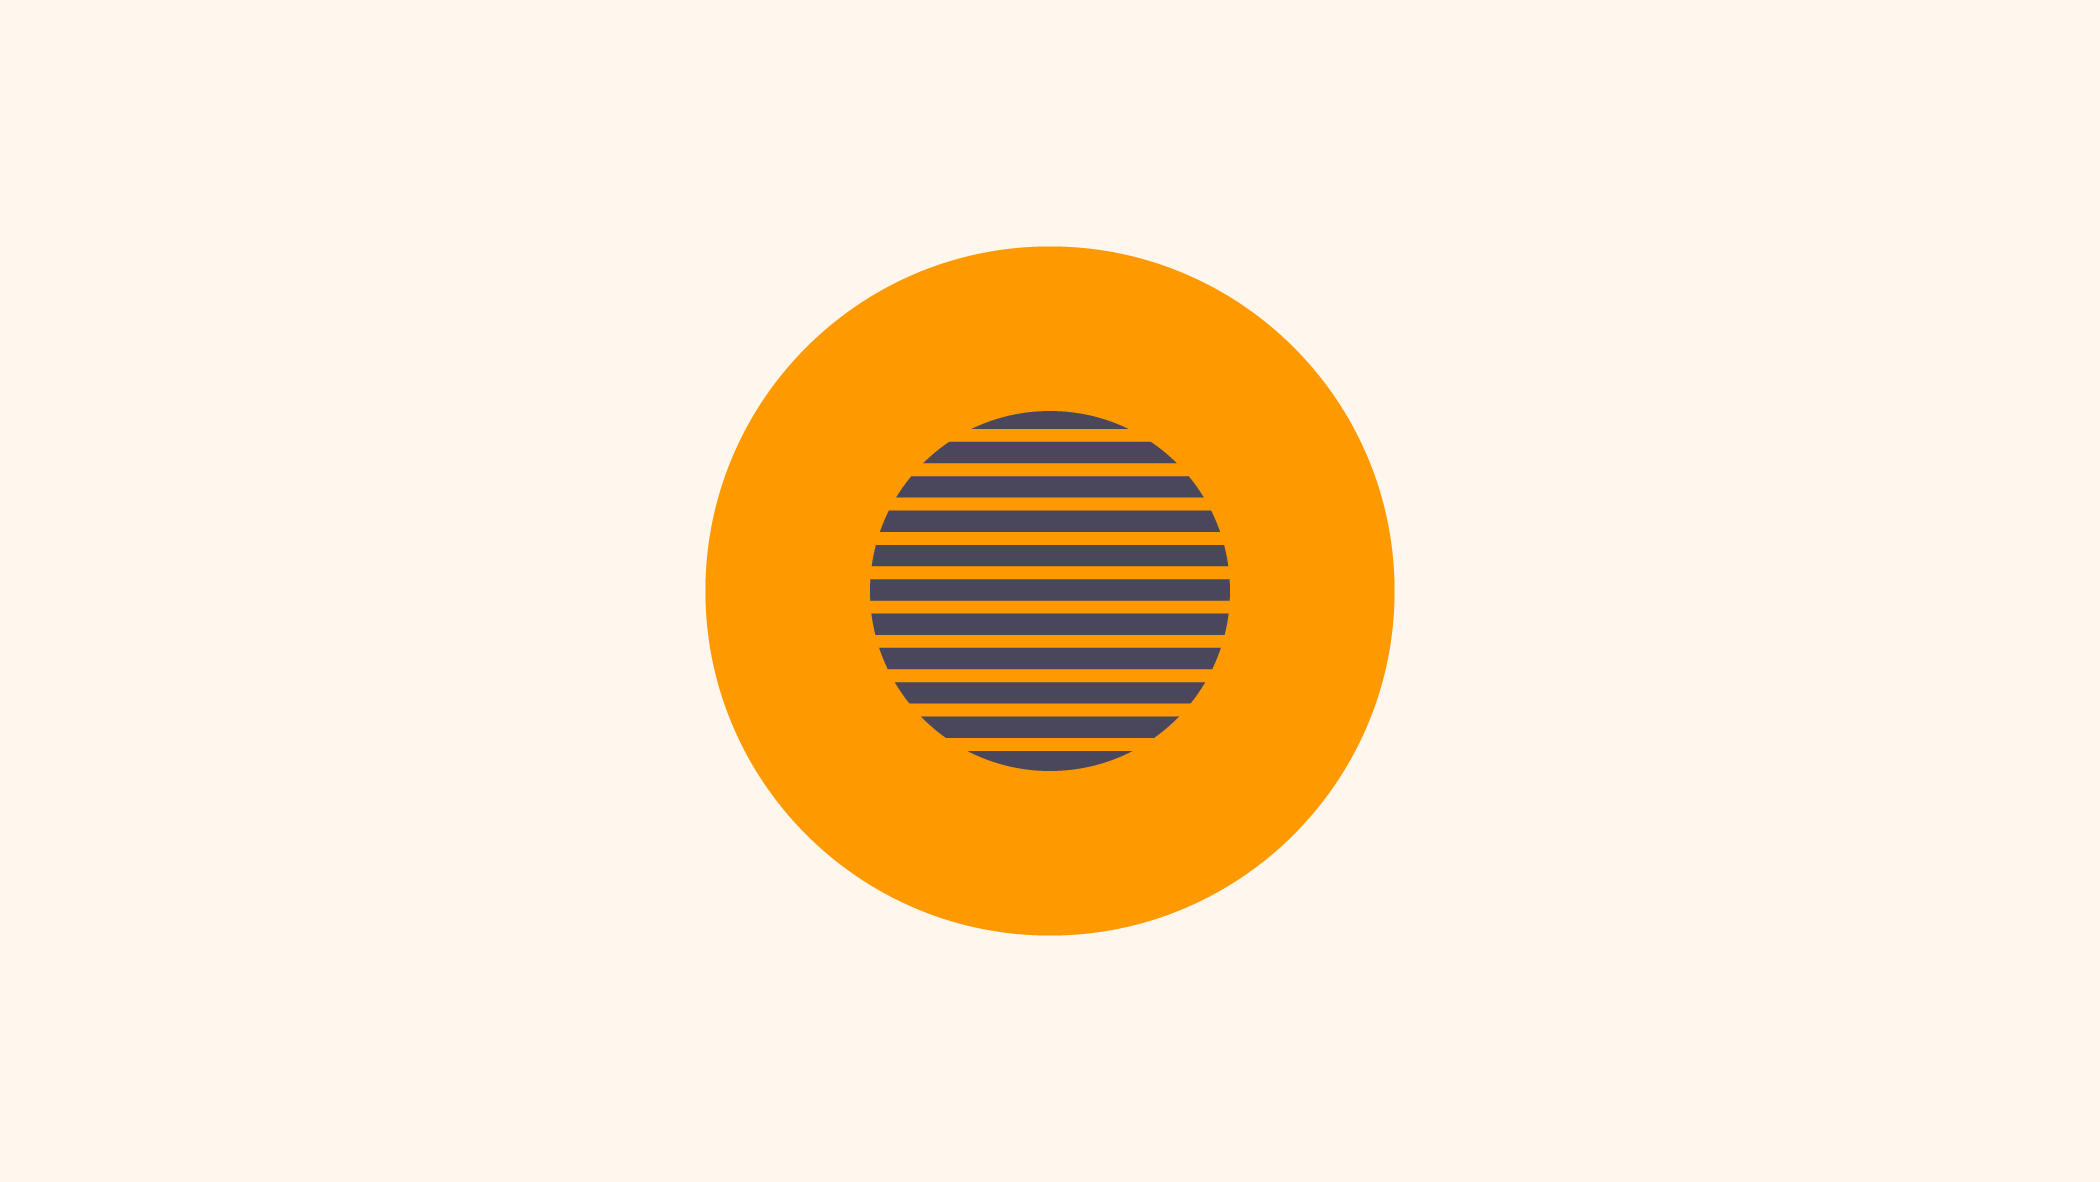 a geometric blue circle encompassed by a larger orange one